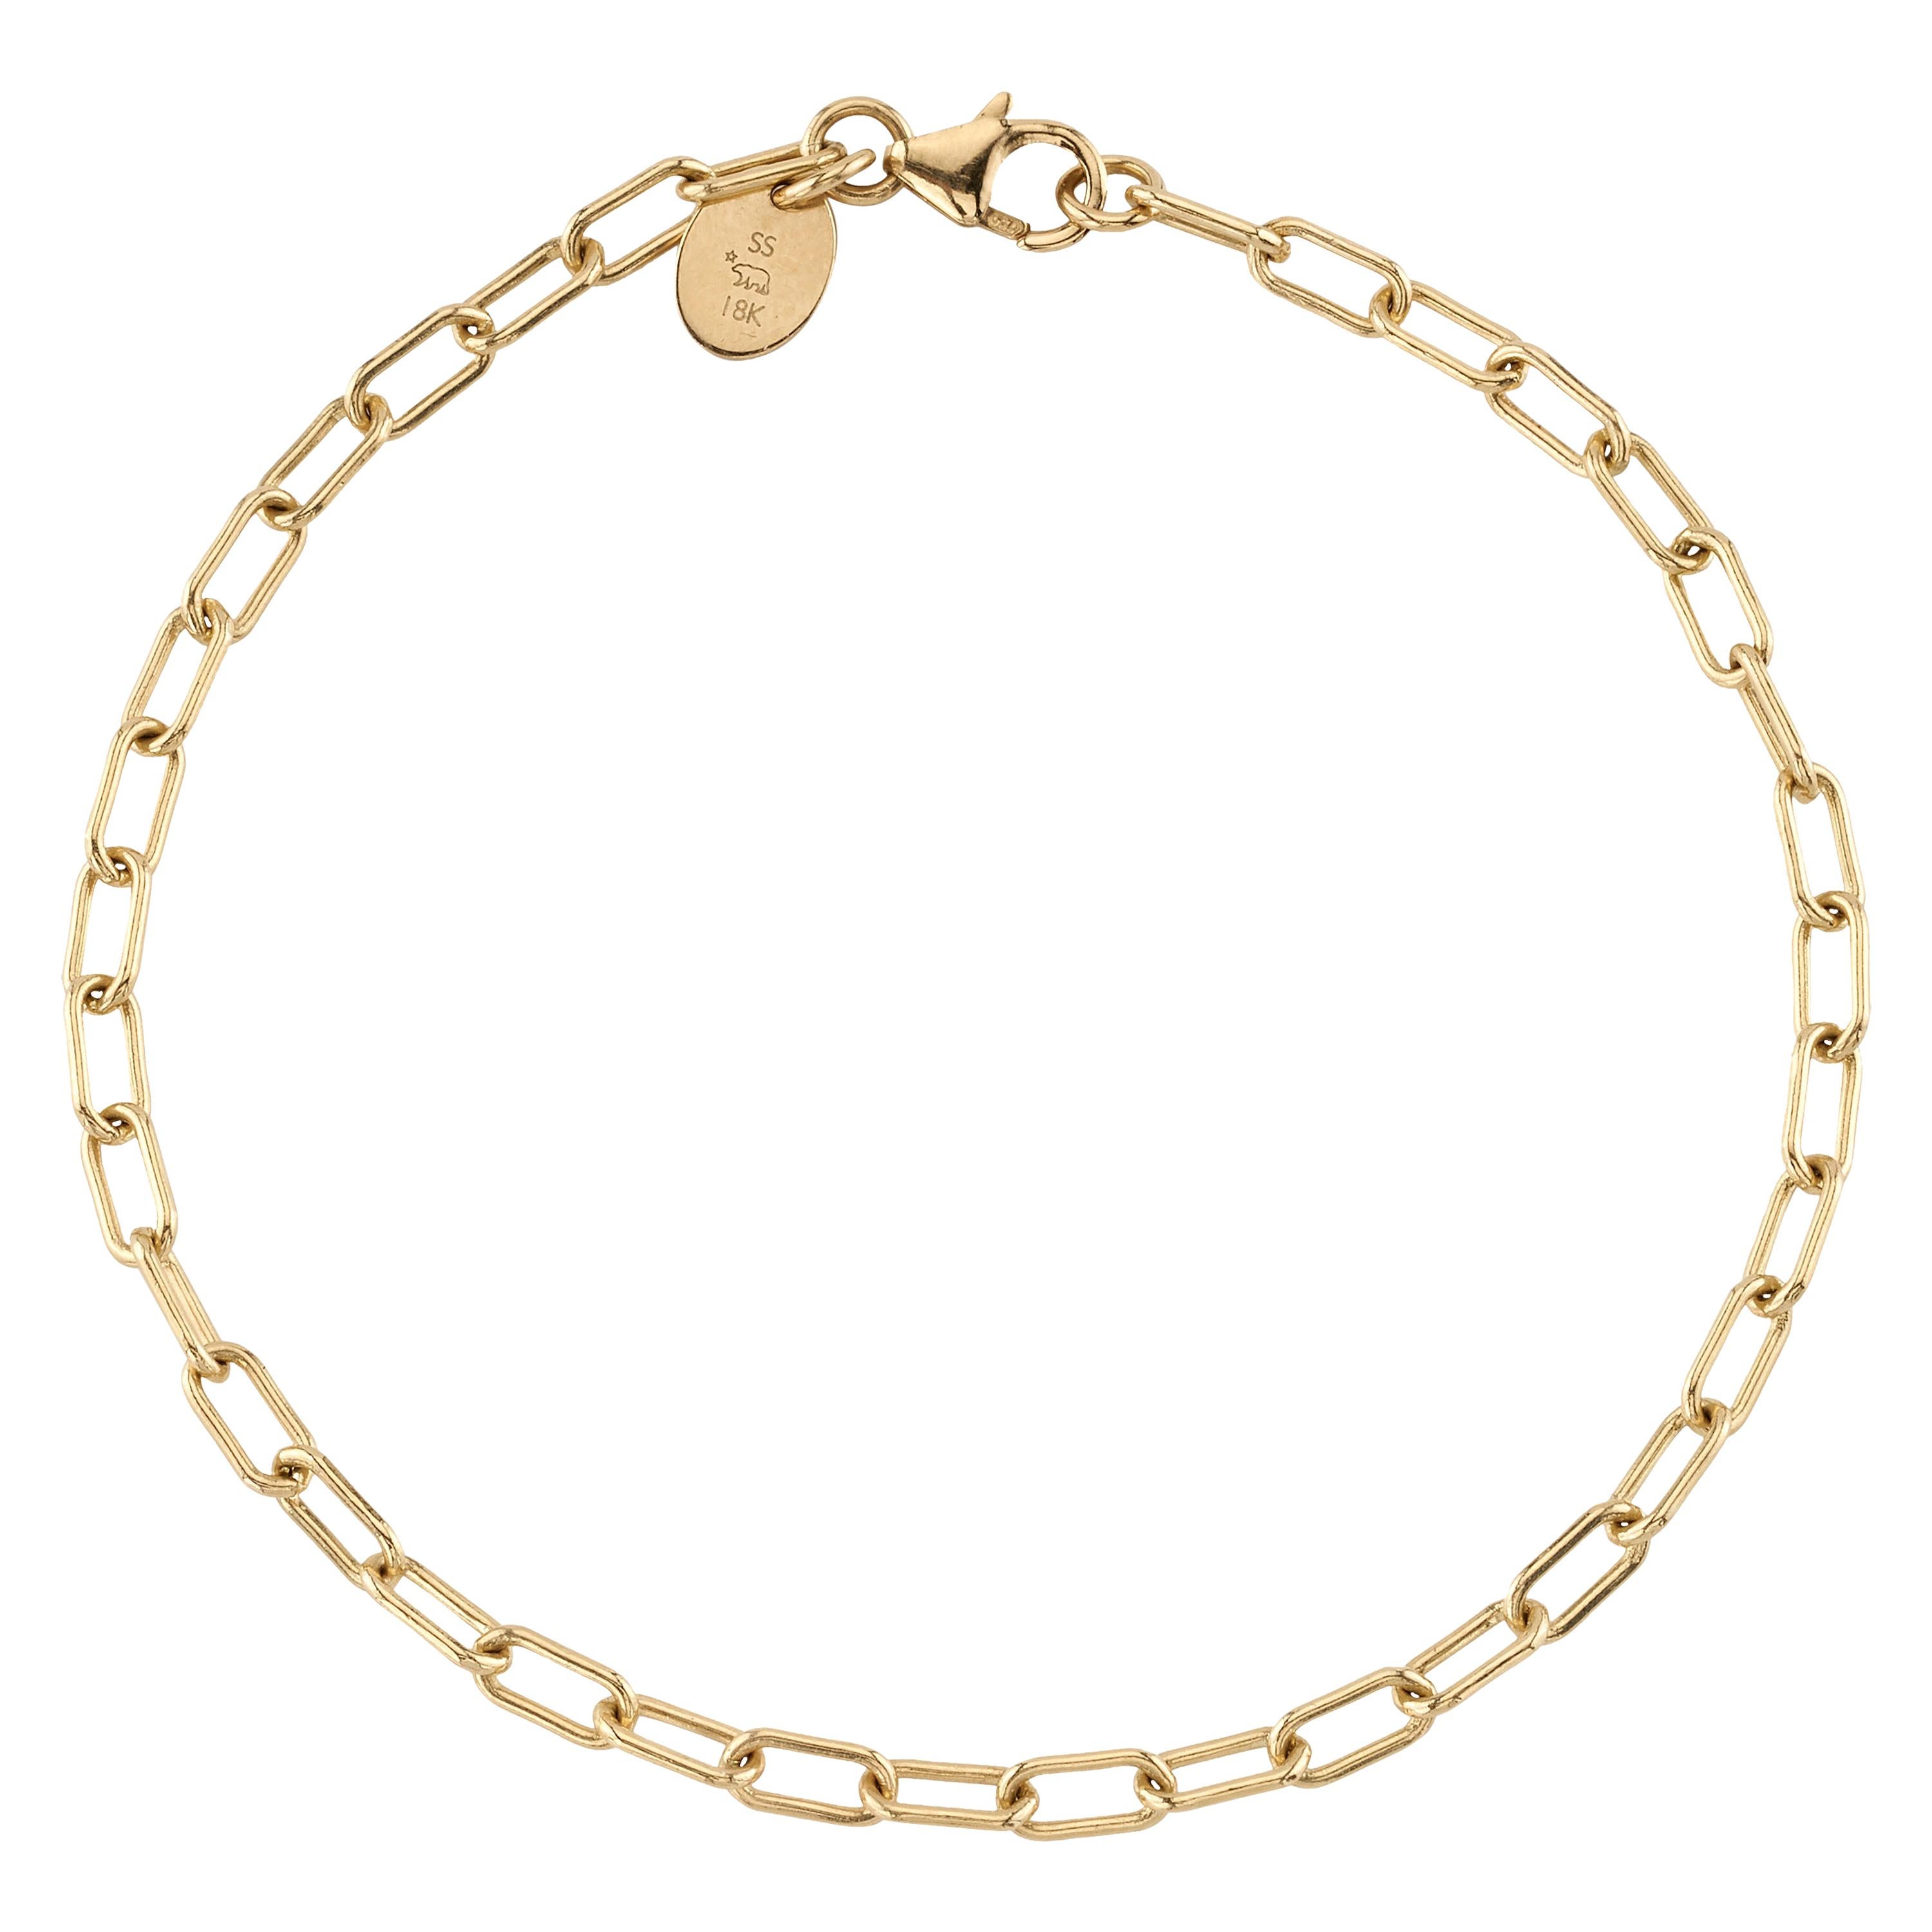 Handcrafted Bond Bracelet in 18K Yellow Gold by Single Stone